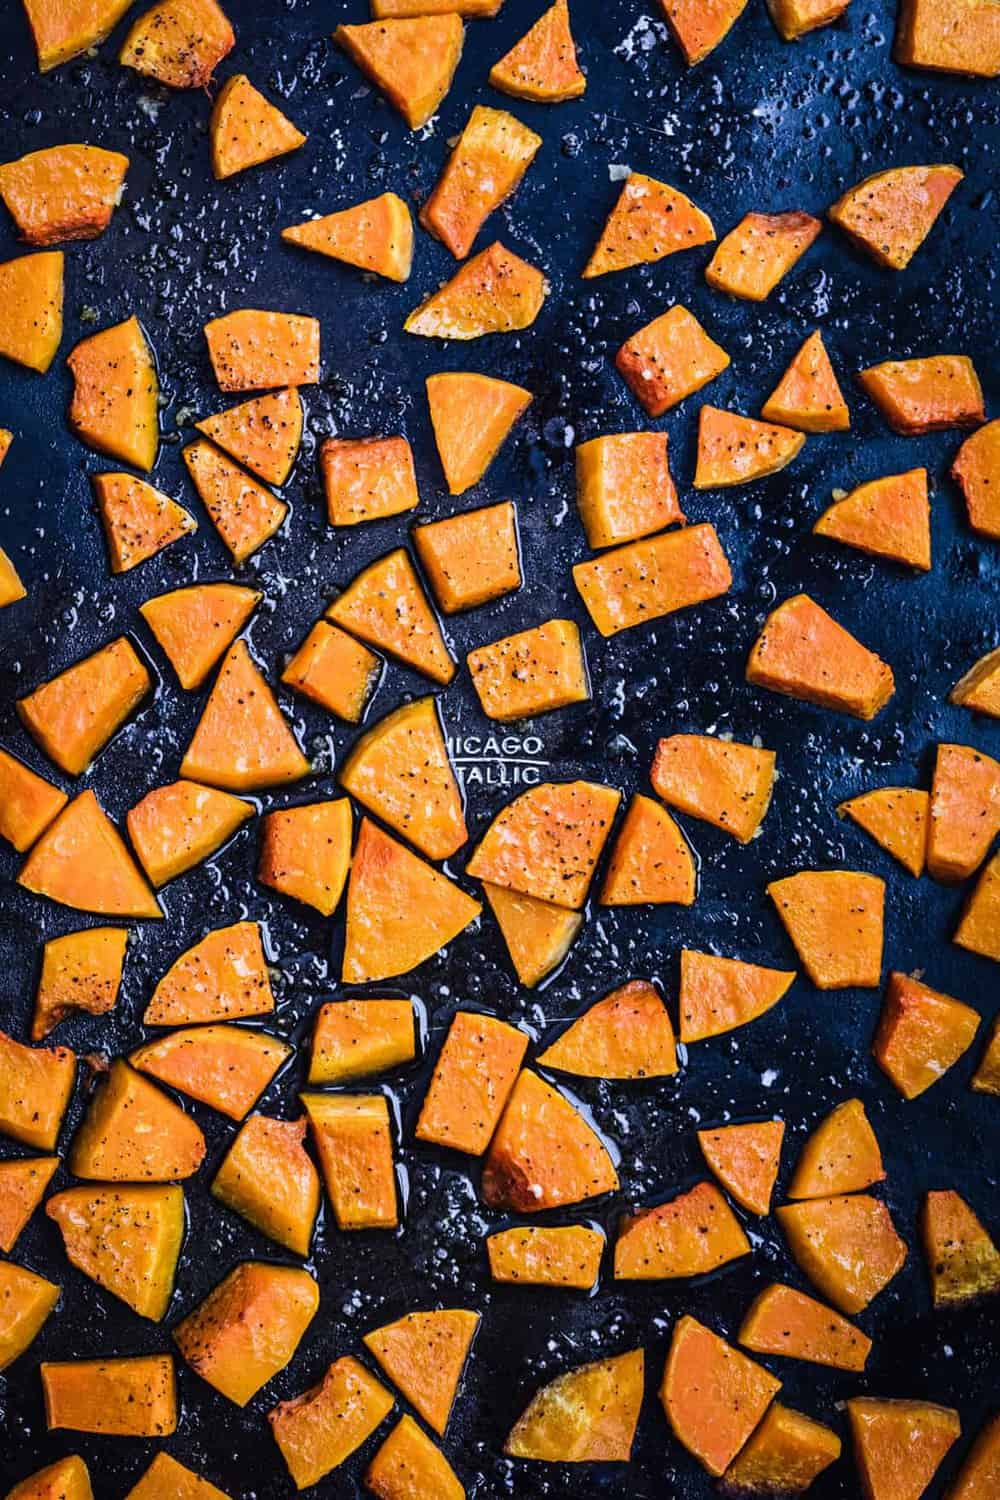 Roasted squash, on a baking sheet, post oven.